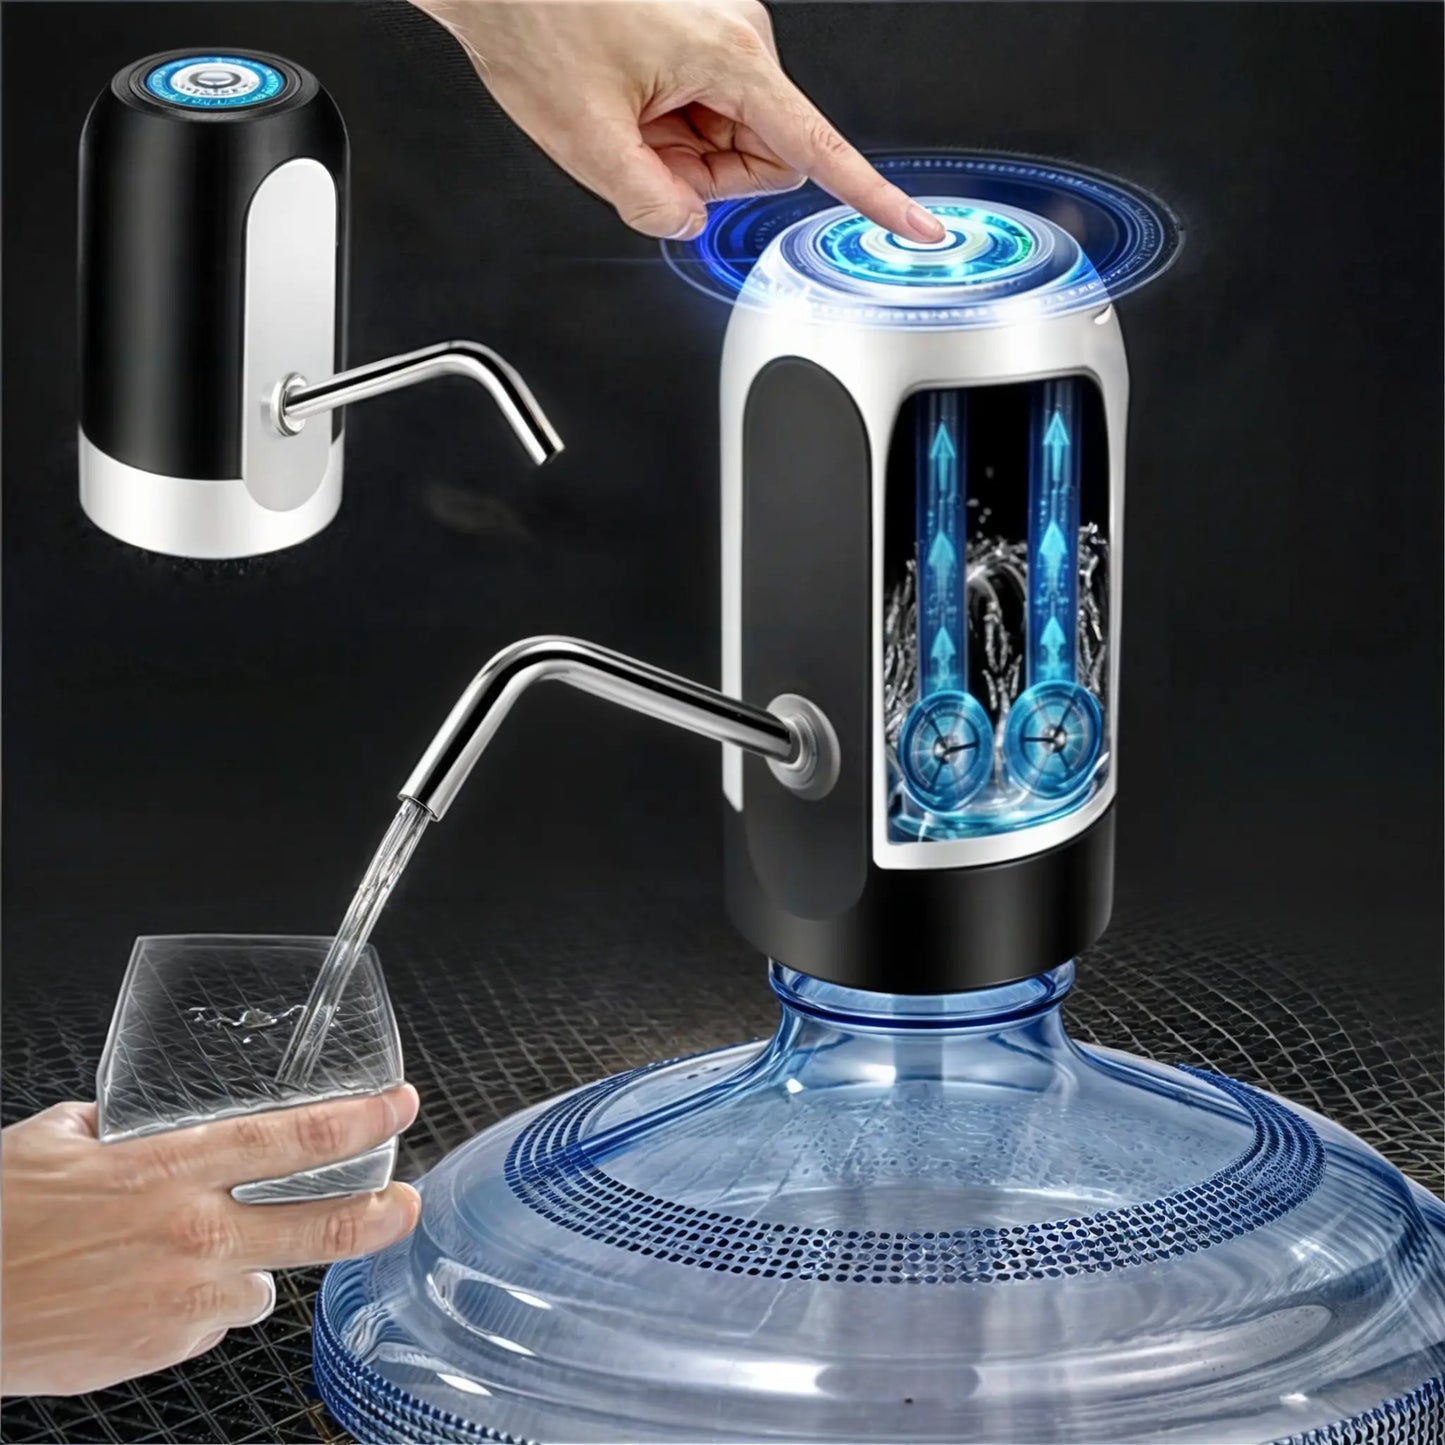 Portable Electric Water Dispenser - 50% Discount 🔥